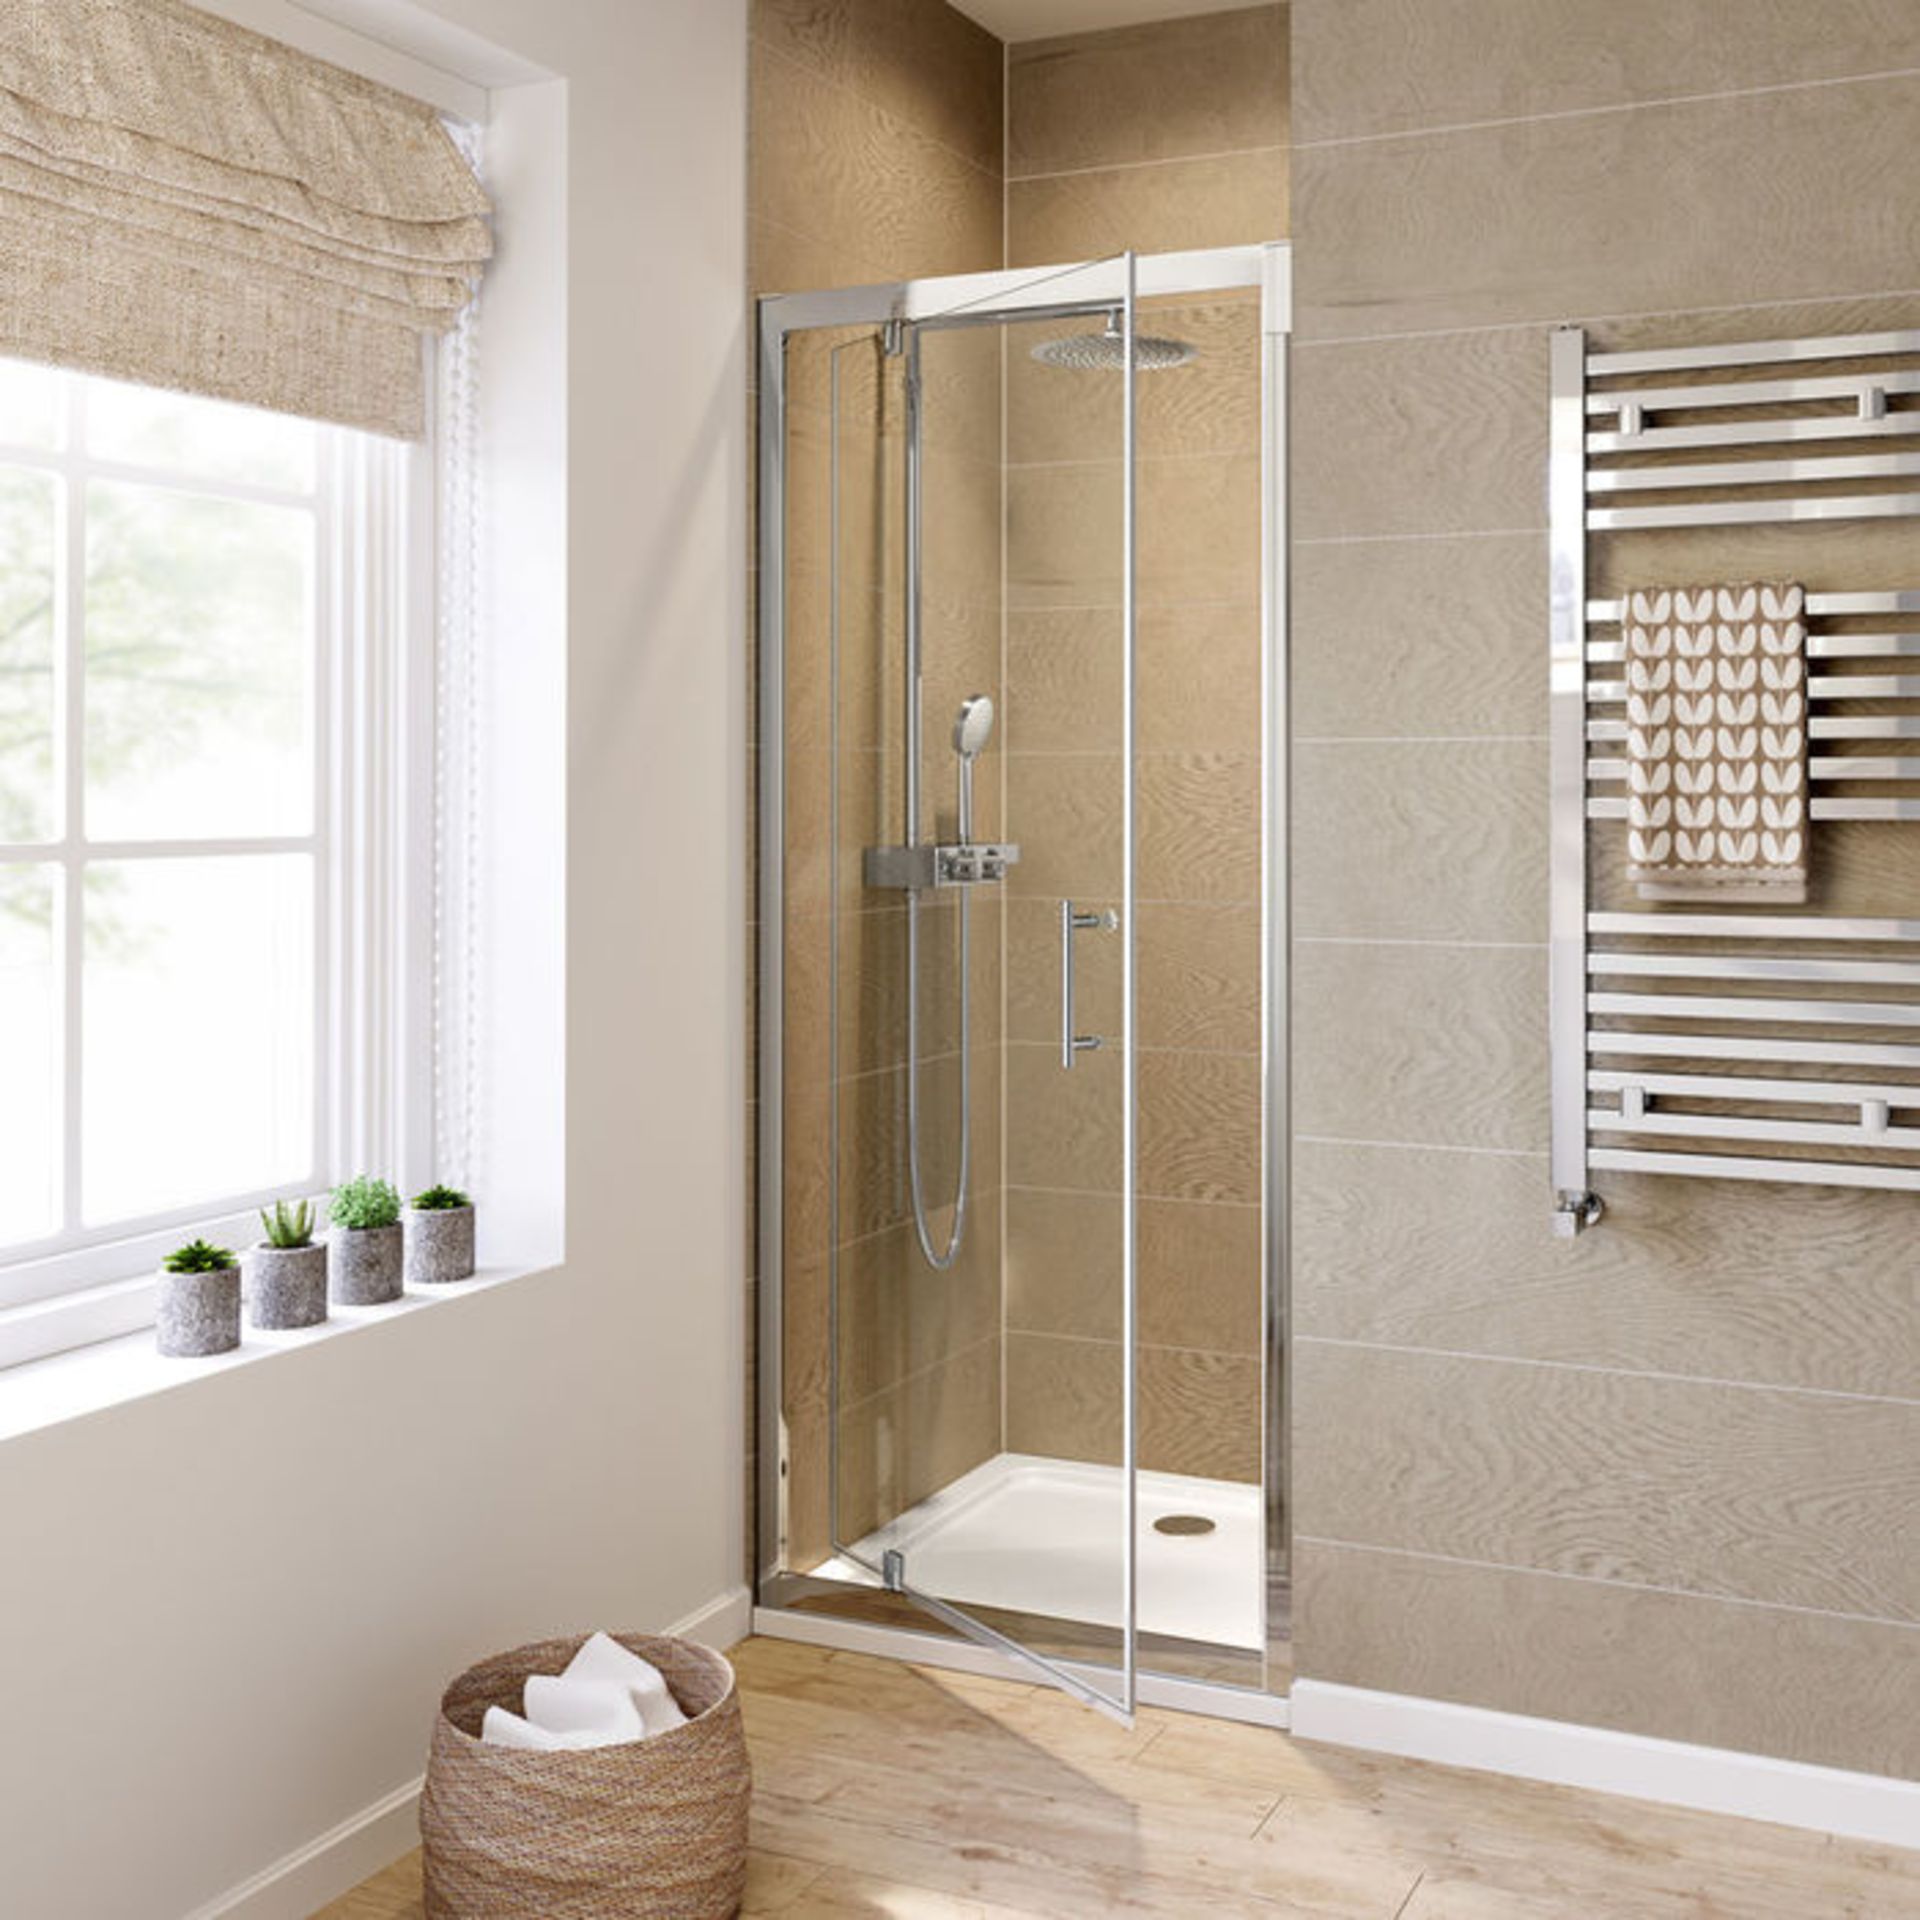 New 700mm - 6mm - Premium Pivot Shower Door. RRP £299.99.8mm Safety Glass Fully Waterproof T... - Image 2 of 3